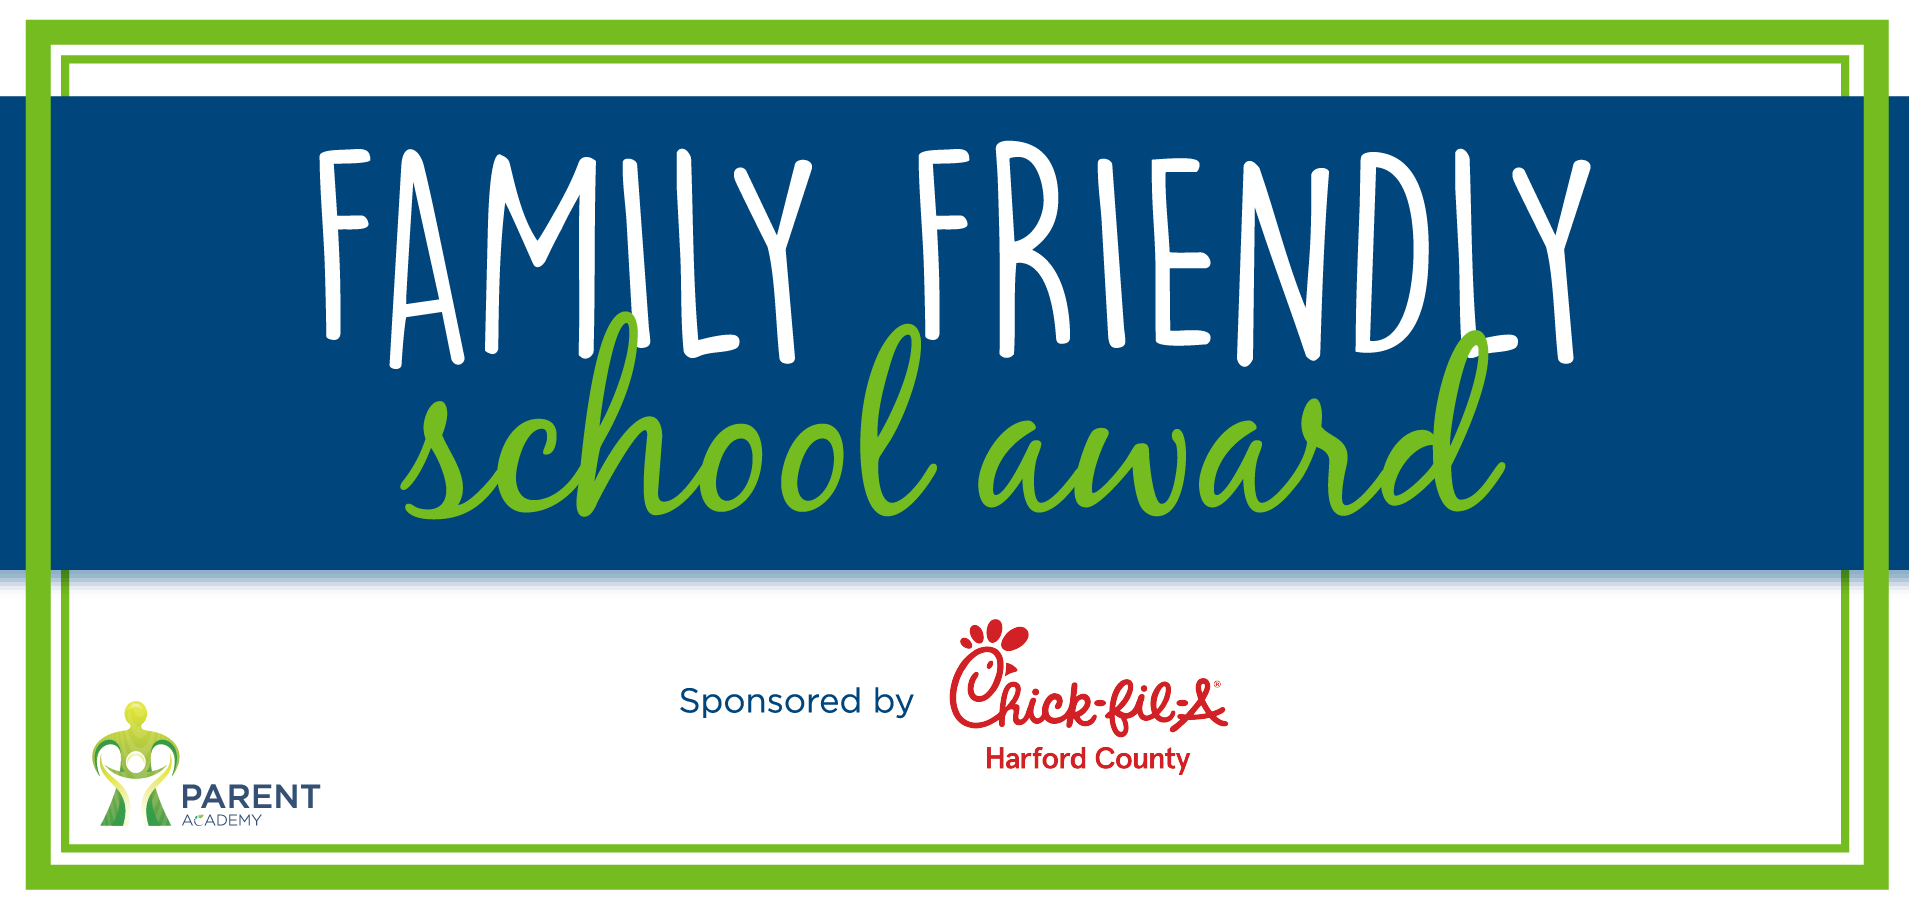 Nominate your school today for the Family Friendly School Award!